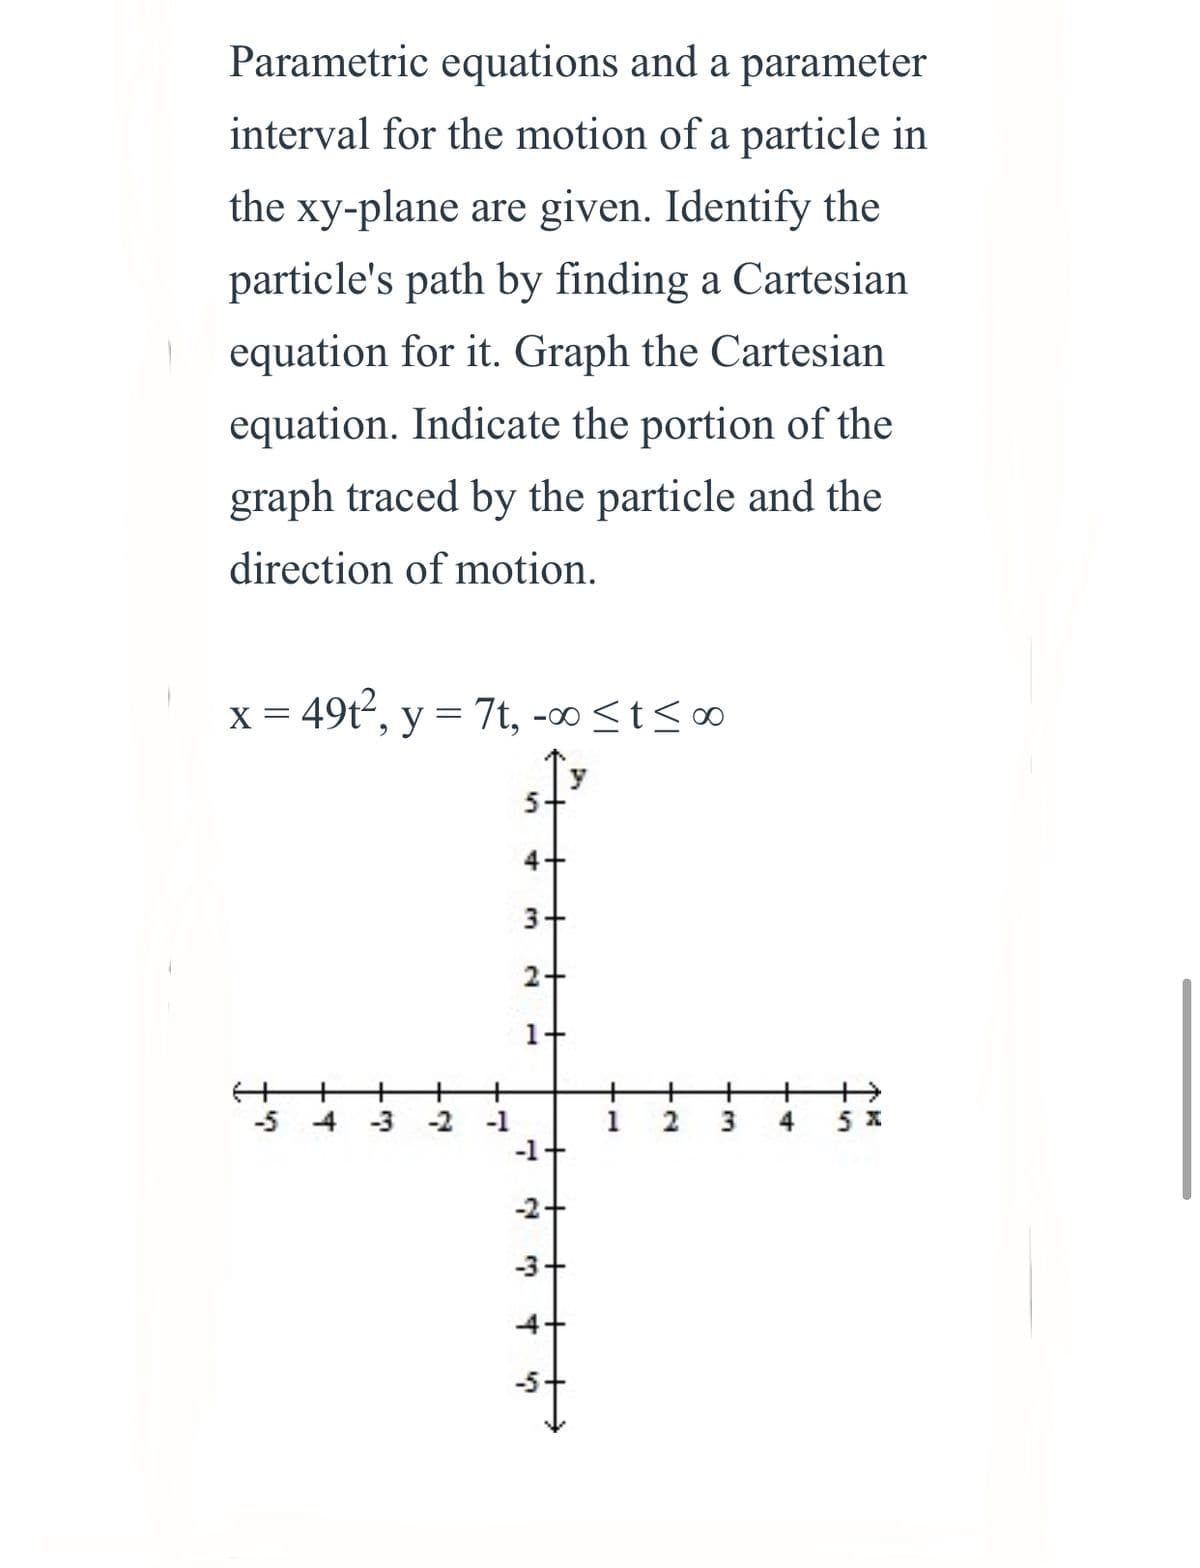 Parametric equations and a parameter
interval for the motion of a particle in
the xy-plane are given. Identify the
particle's path by finding a Cartesian
equation for it. Graph the Cartesian
equation. Indicate the portion of the
graph traced by the particle and the
direction of motion.
x = 49t, y = 7t, -∞ <t<∞
4+
3+
2+
1+
-5 4 -3 -2 -1
-1+
5 x
4
-2+
-3+
